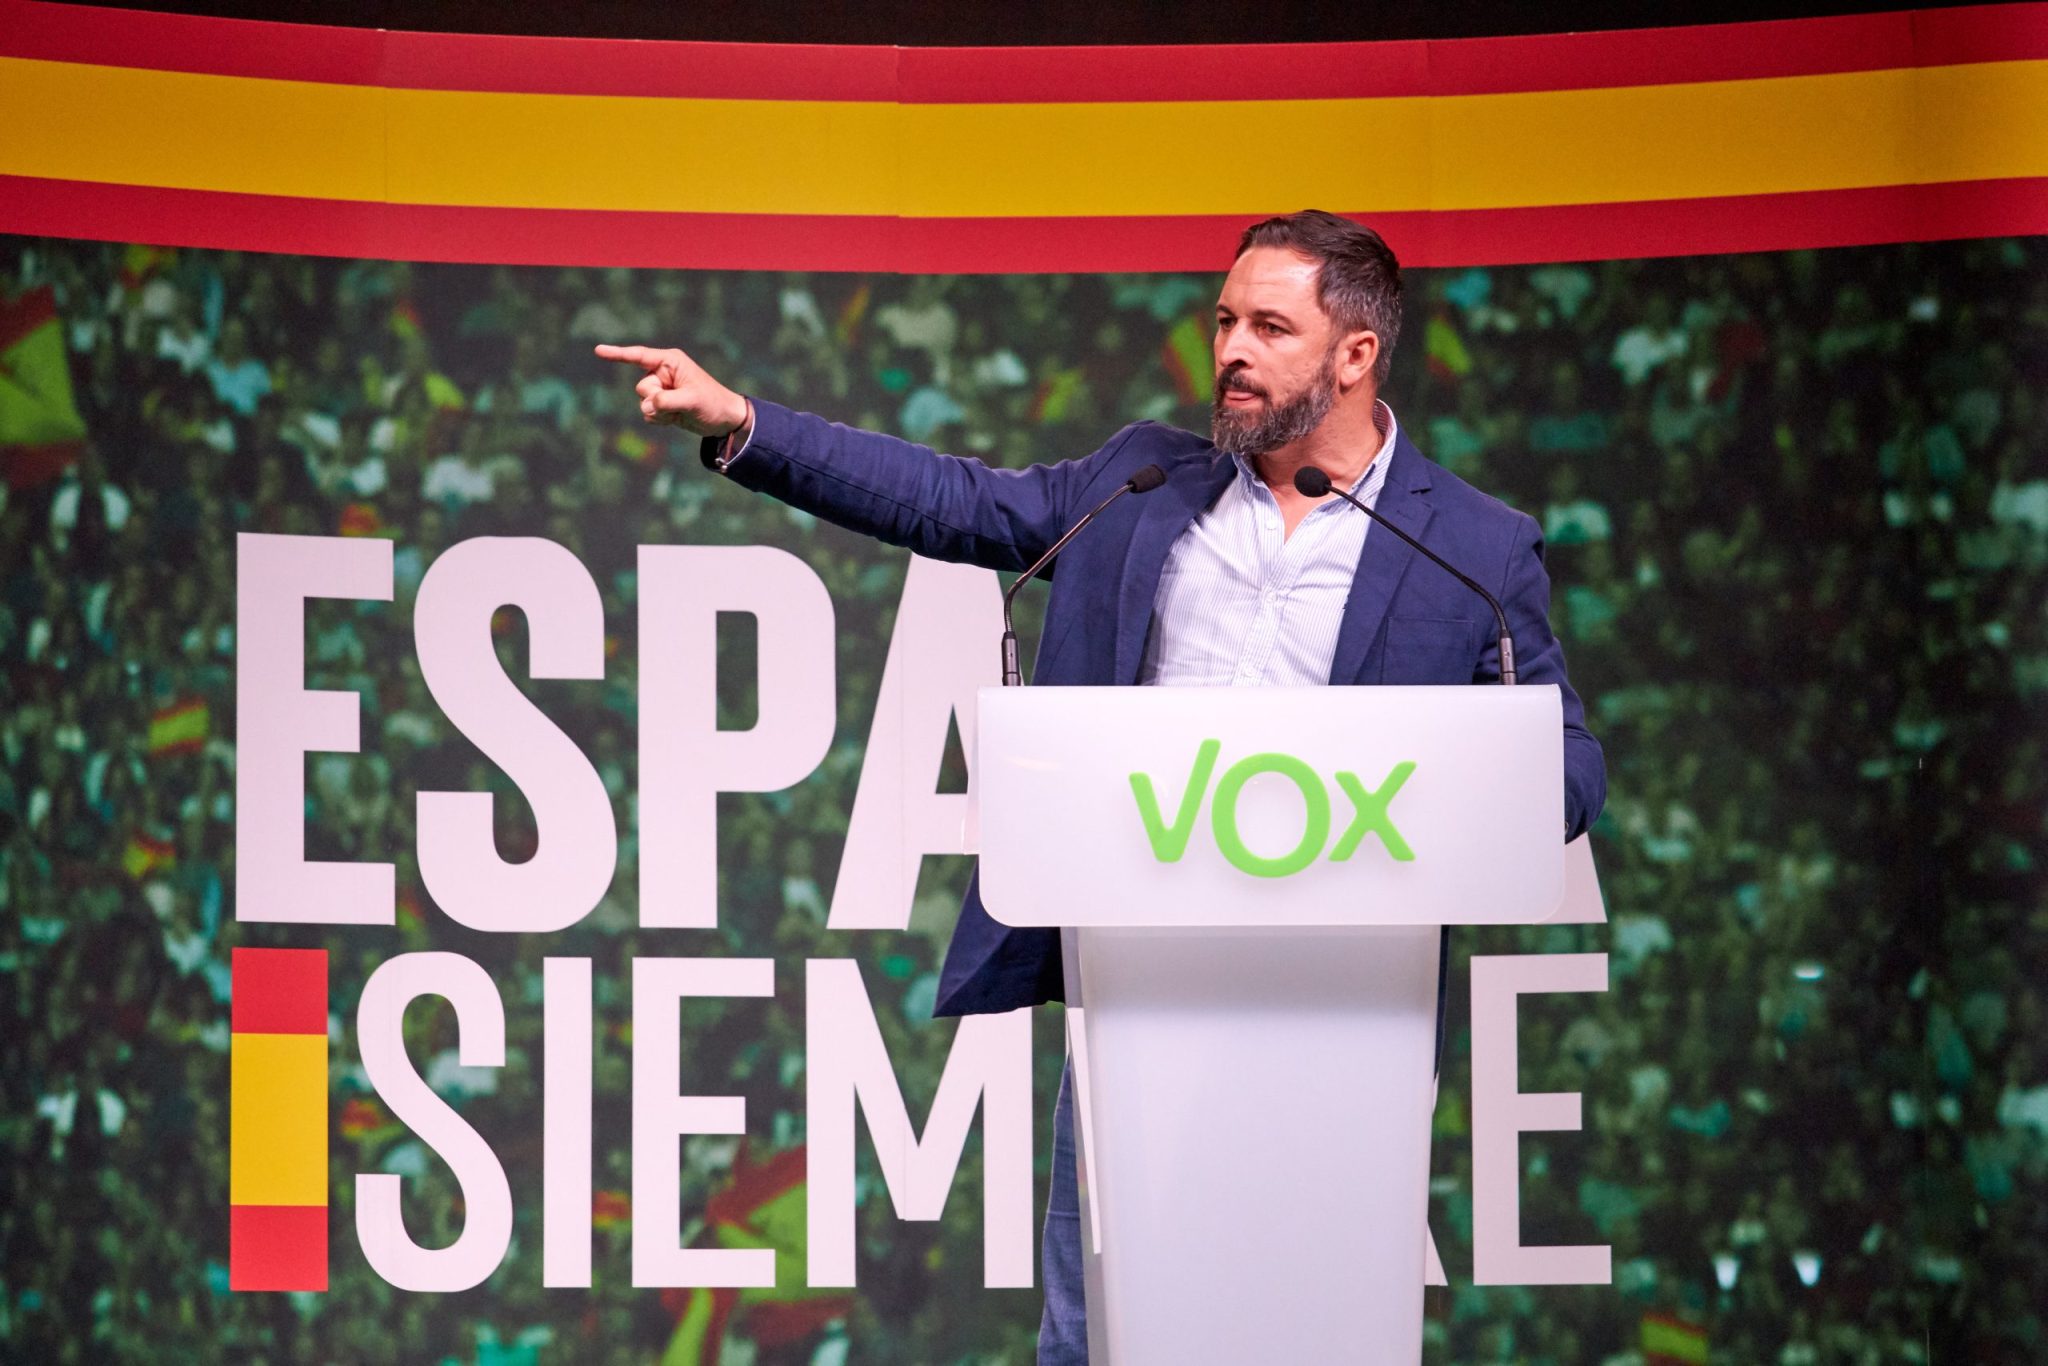 CASTELLON, SPAIN - OCTOBER 2019: Santiago Abascal, leader of the far right party VOX at an election rally